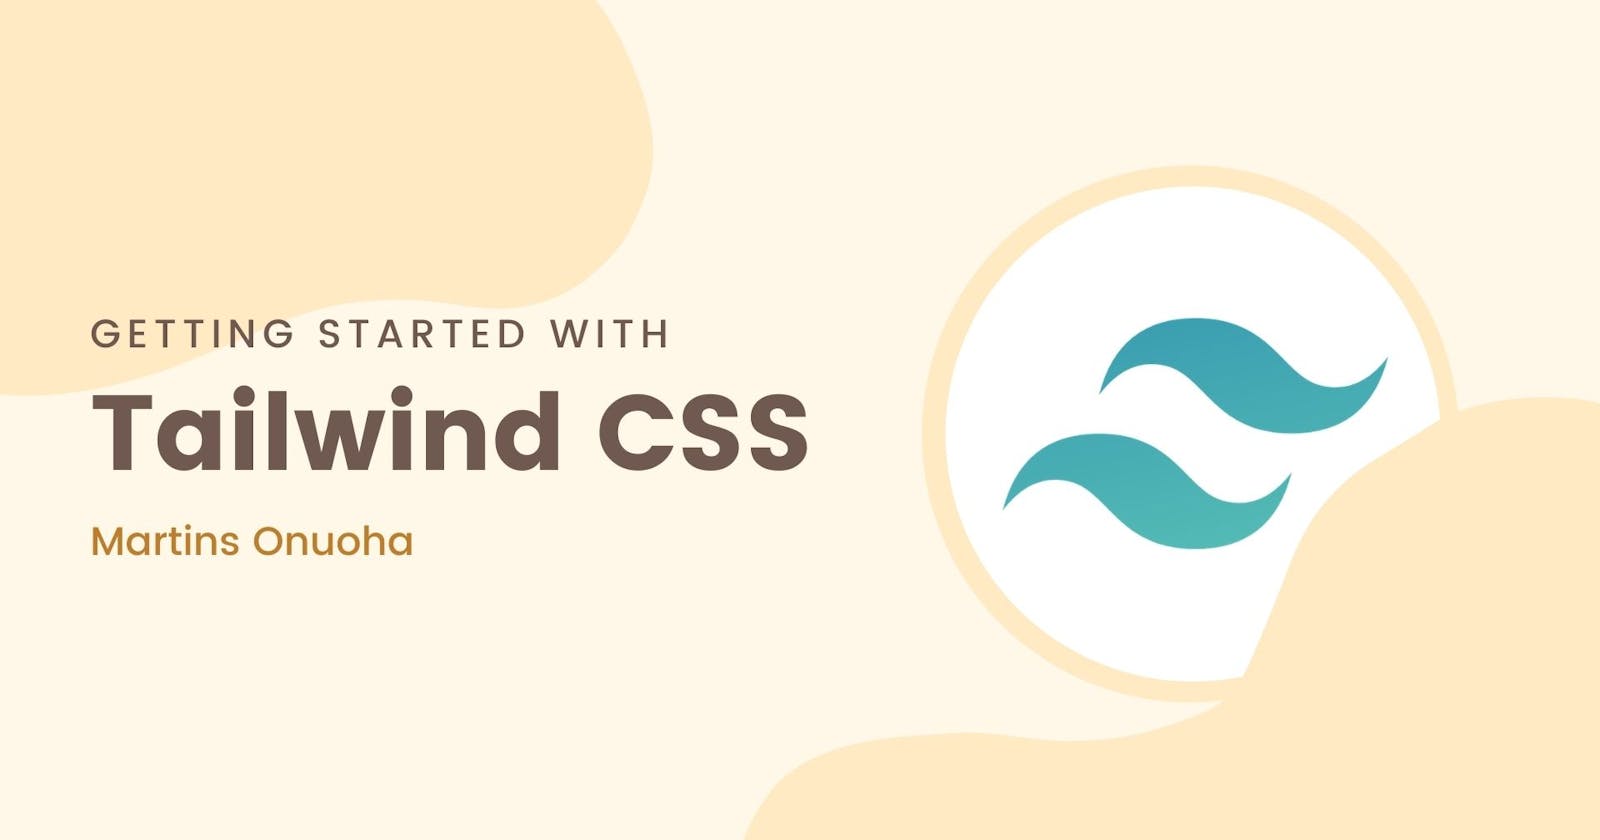 Getting Started with Tailwind CSS